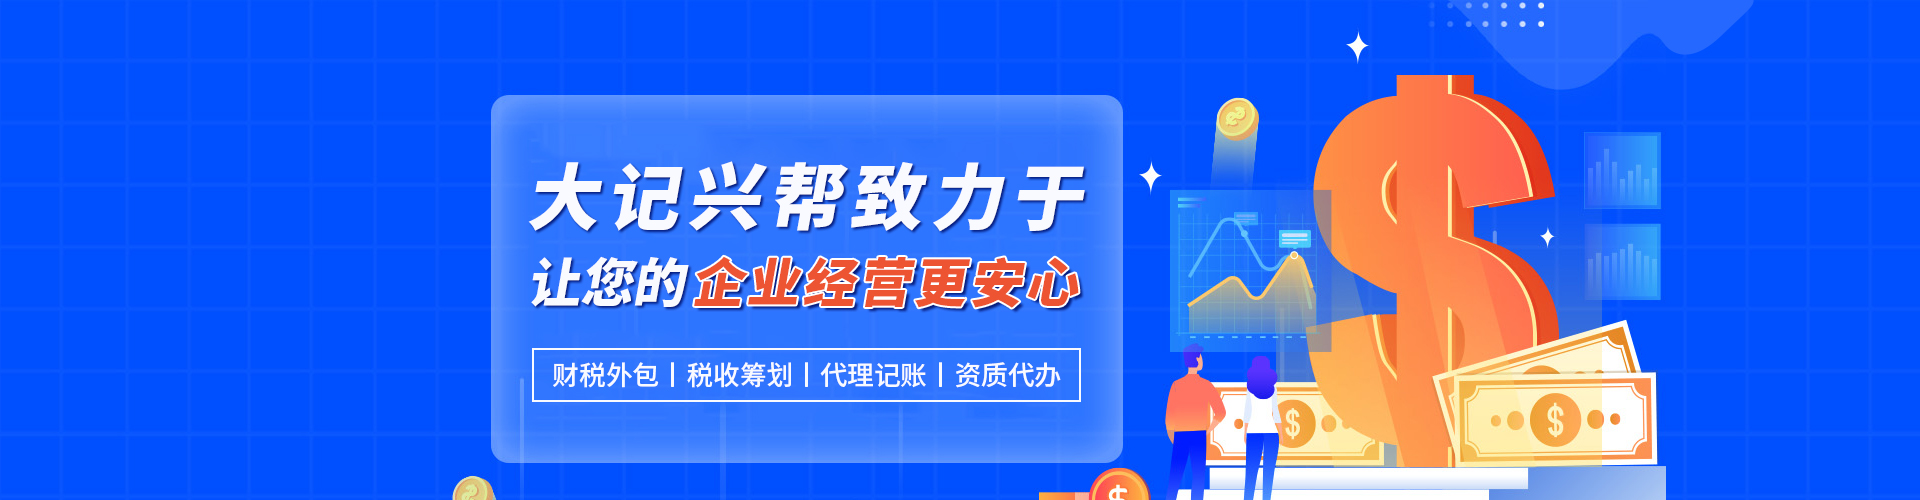 PC-首页banner1